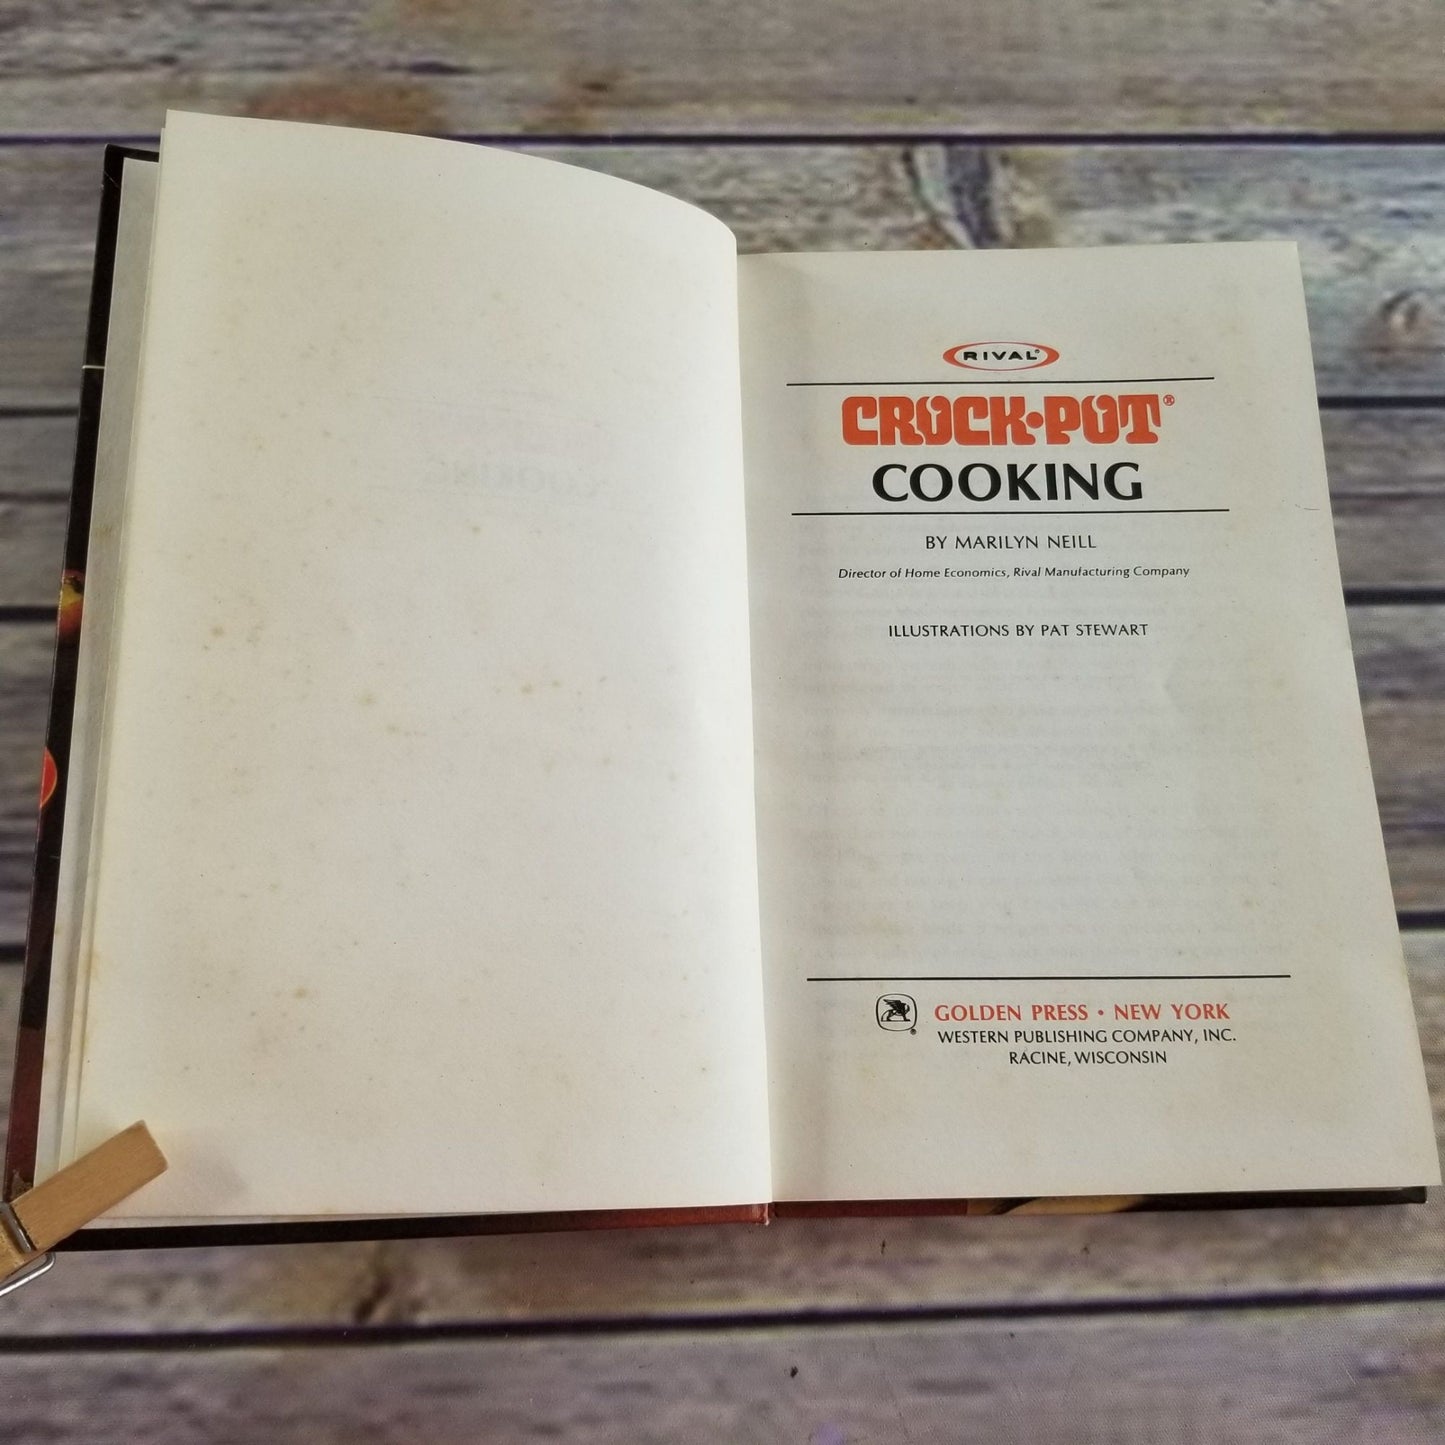 Vintage Rival Crock Pot Cookbook Cooking Recipes Slow Cooker Marilyn Neill Hardcover 1975 Good Housekeeping Golden Press